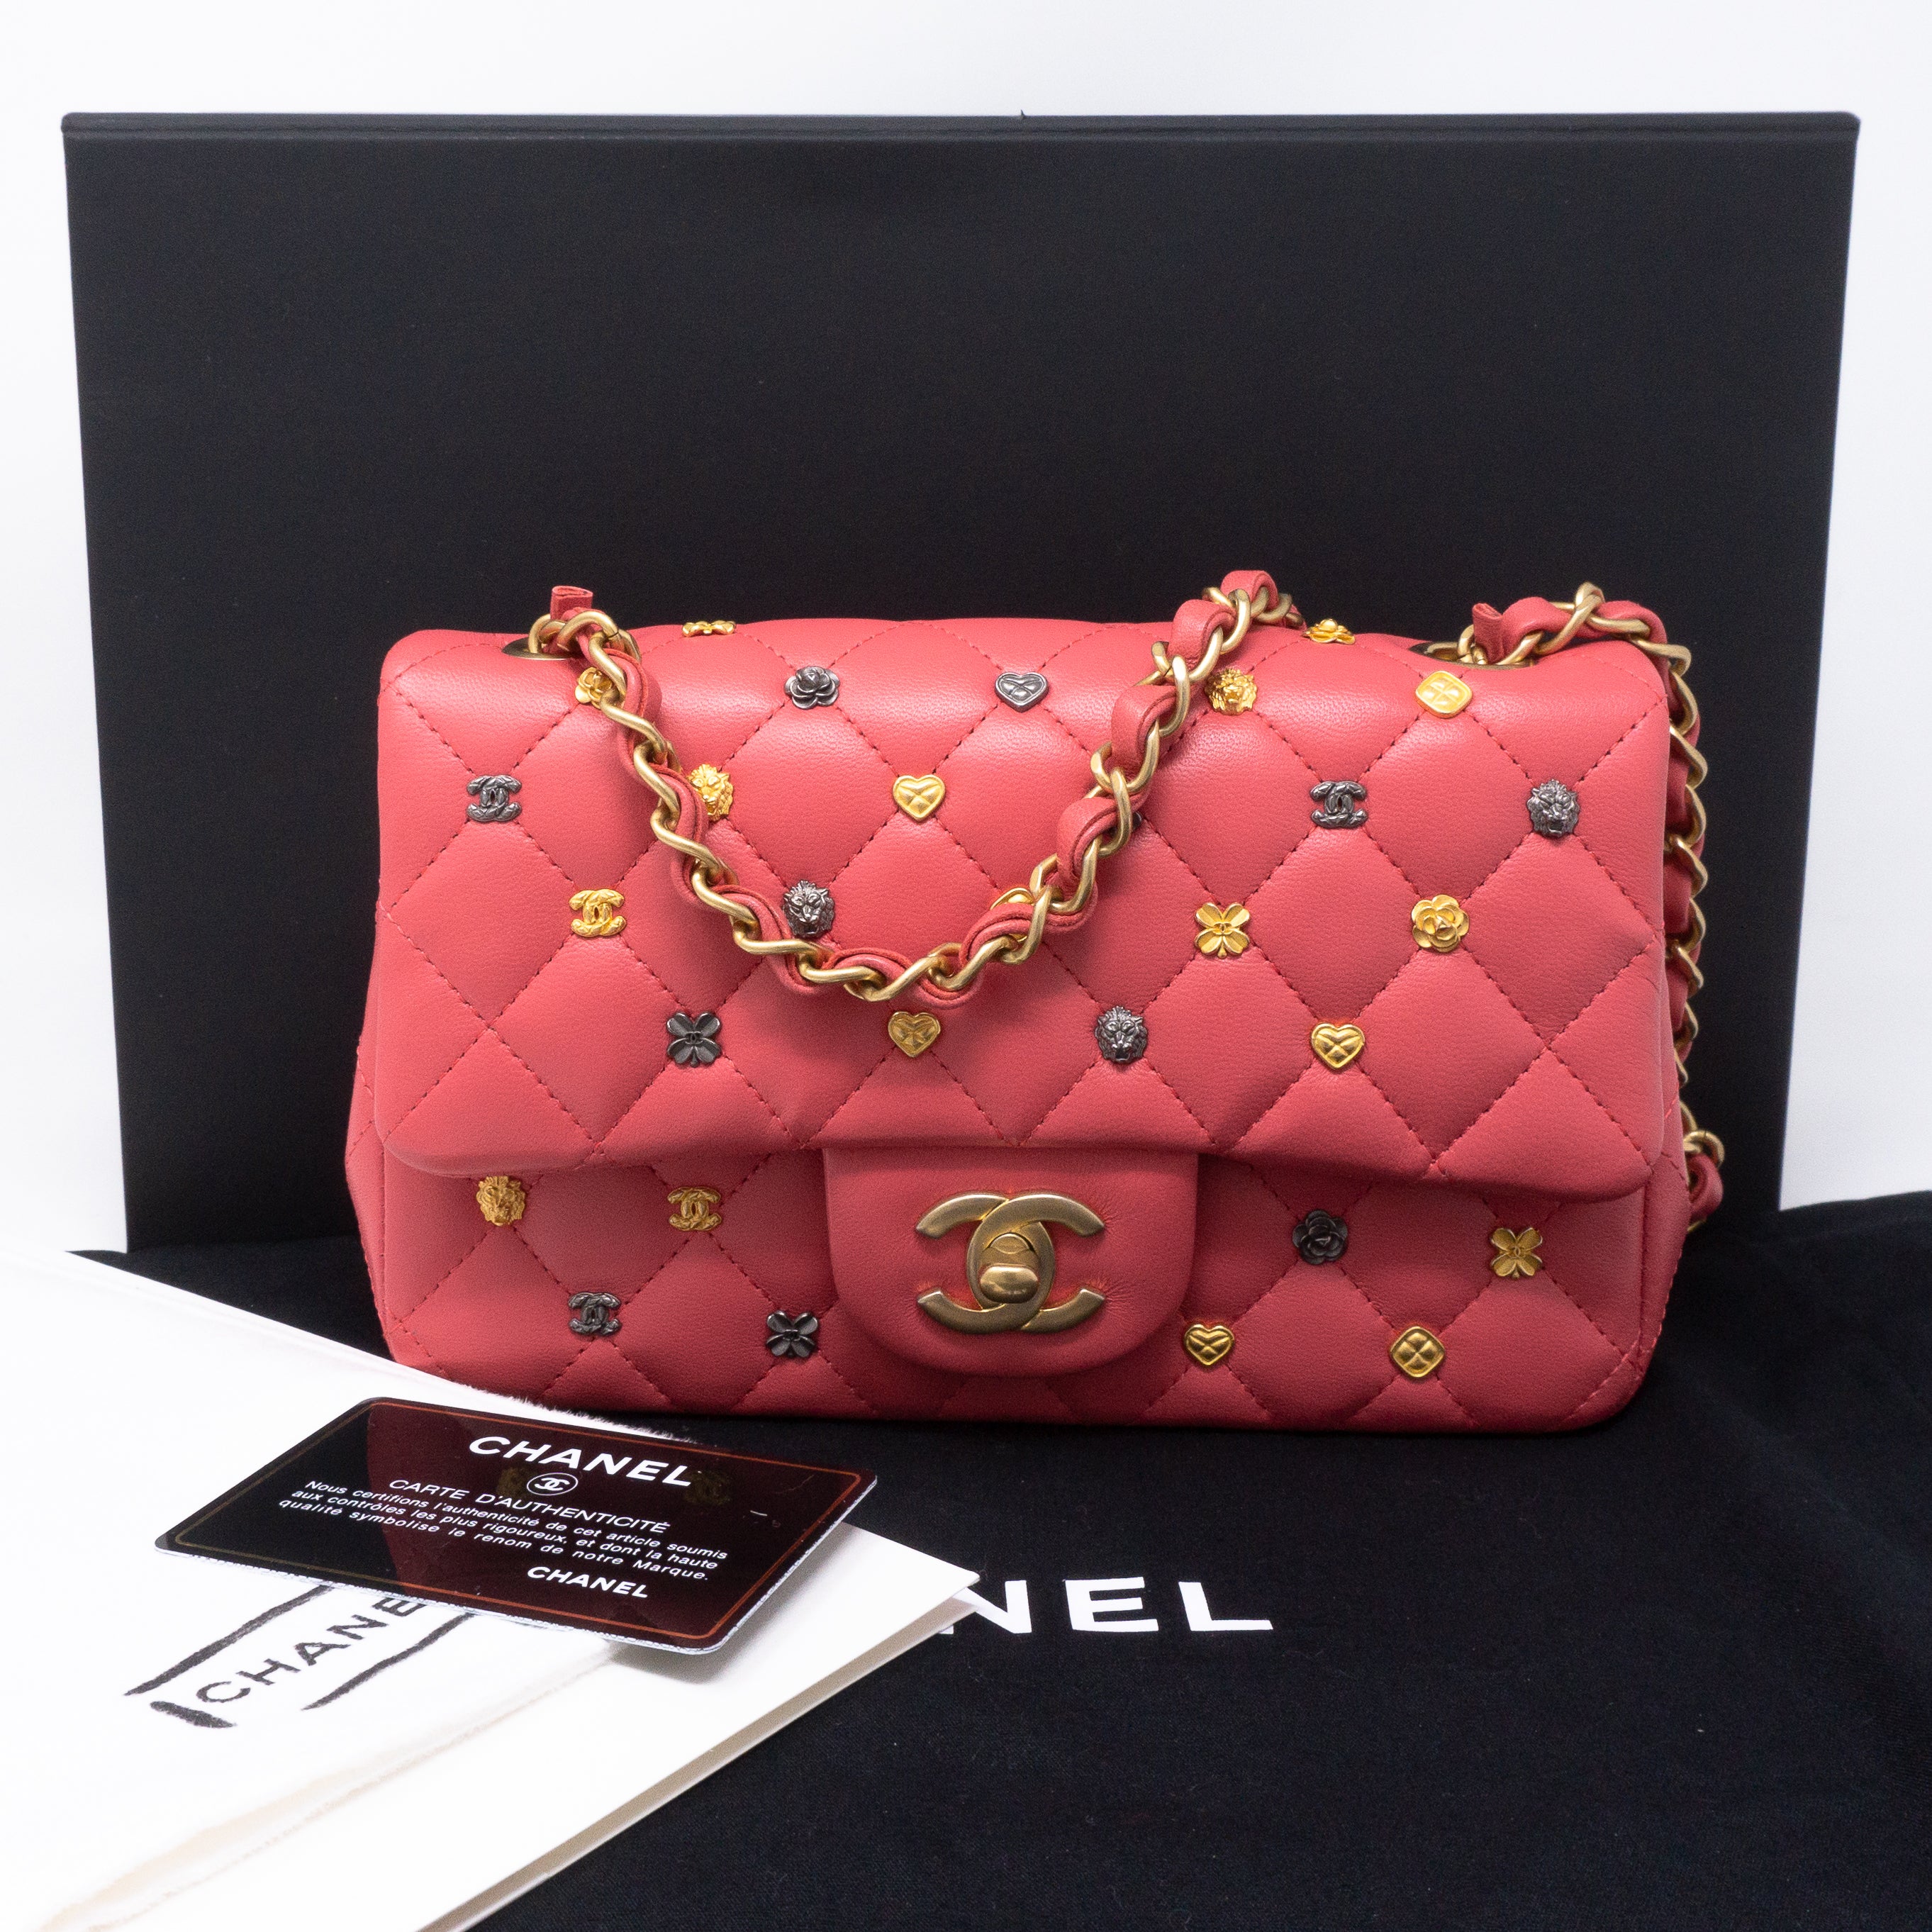 Chanel Black Lambskin Quilted Valentine Charms Mini Rectangular Flap Bag